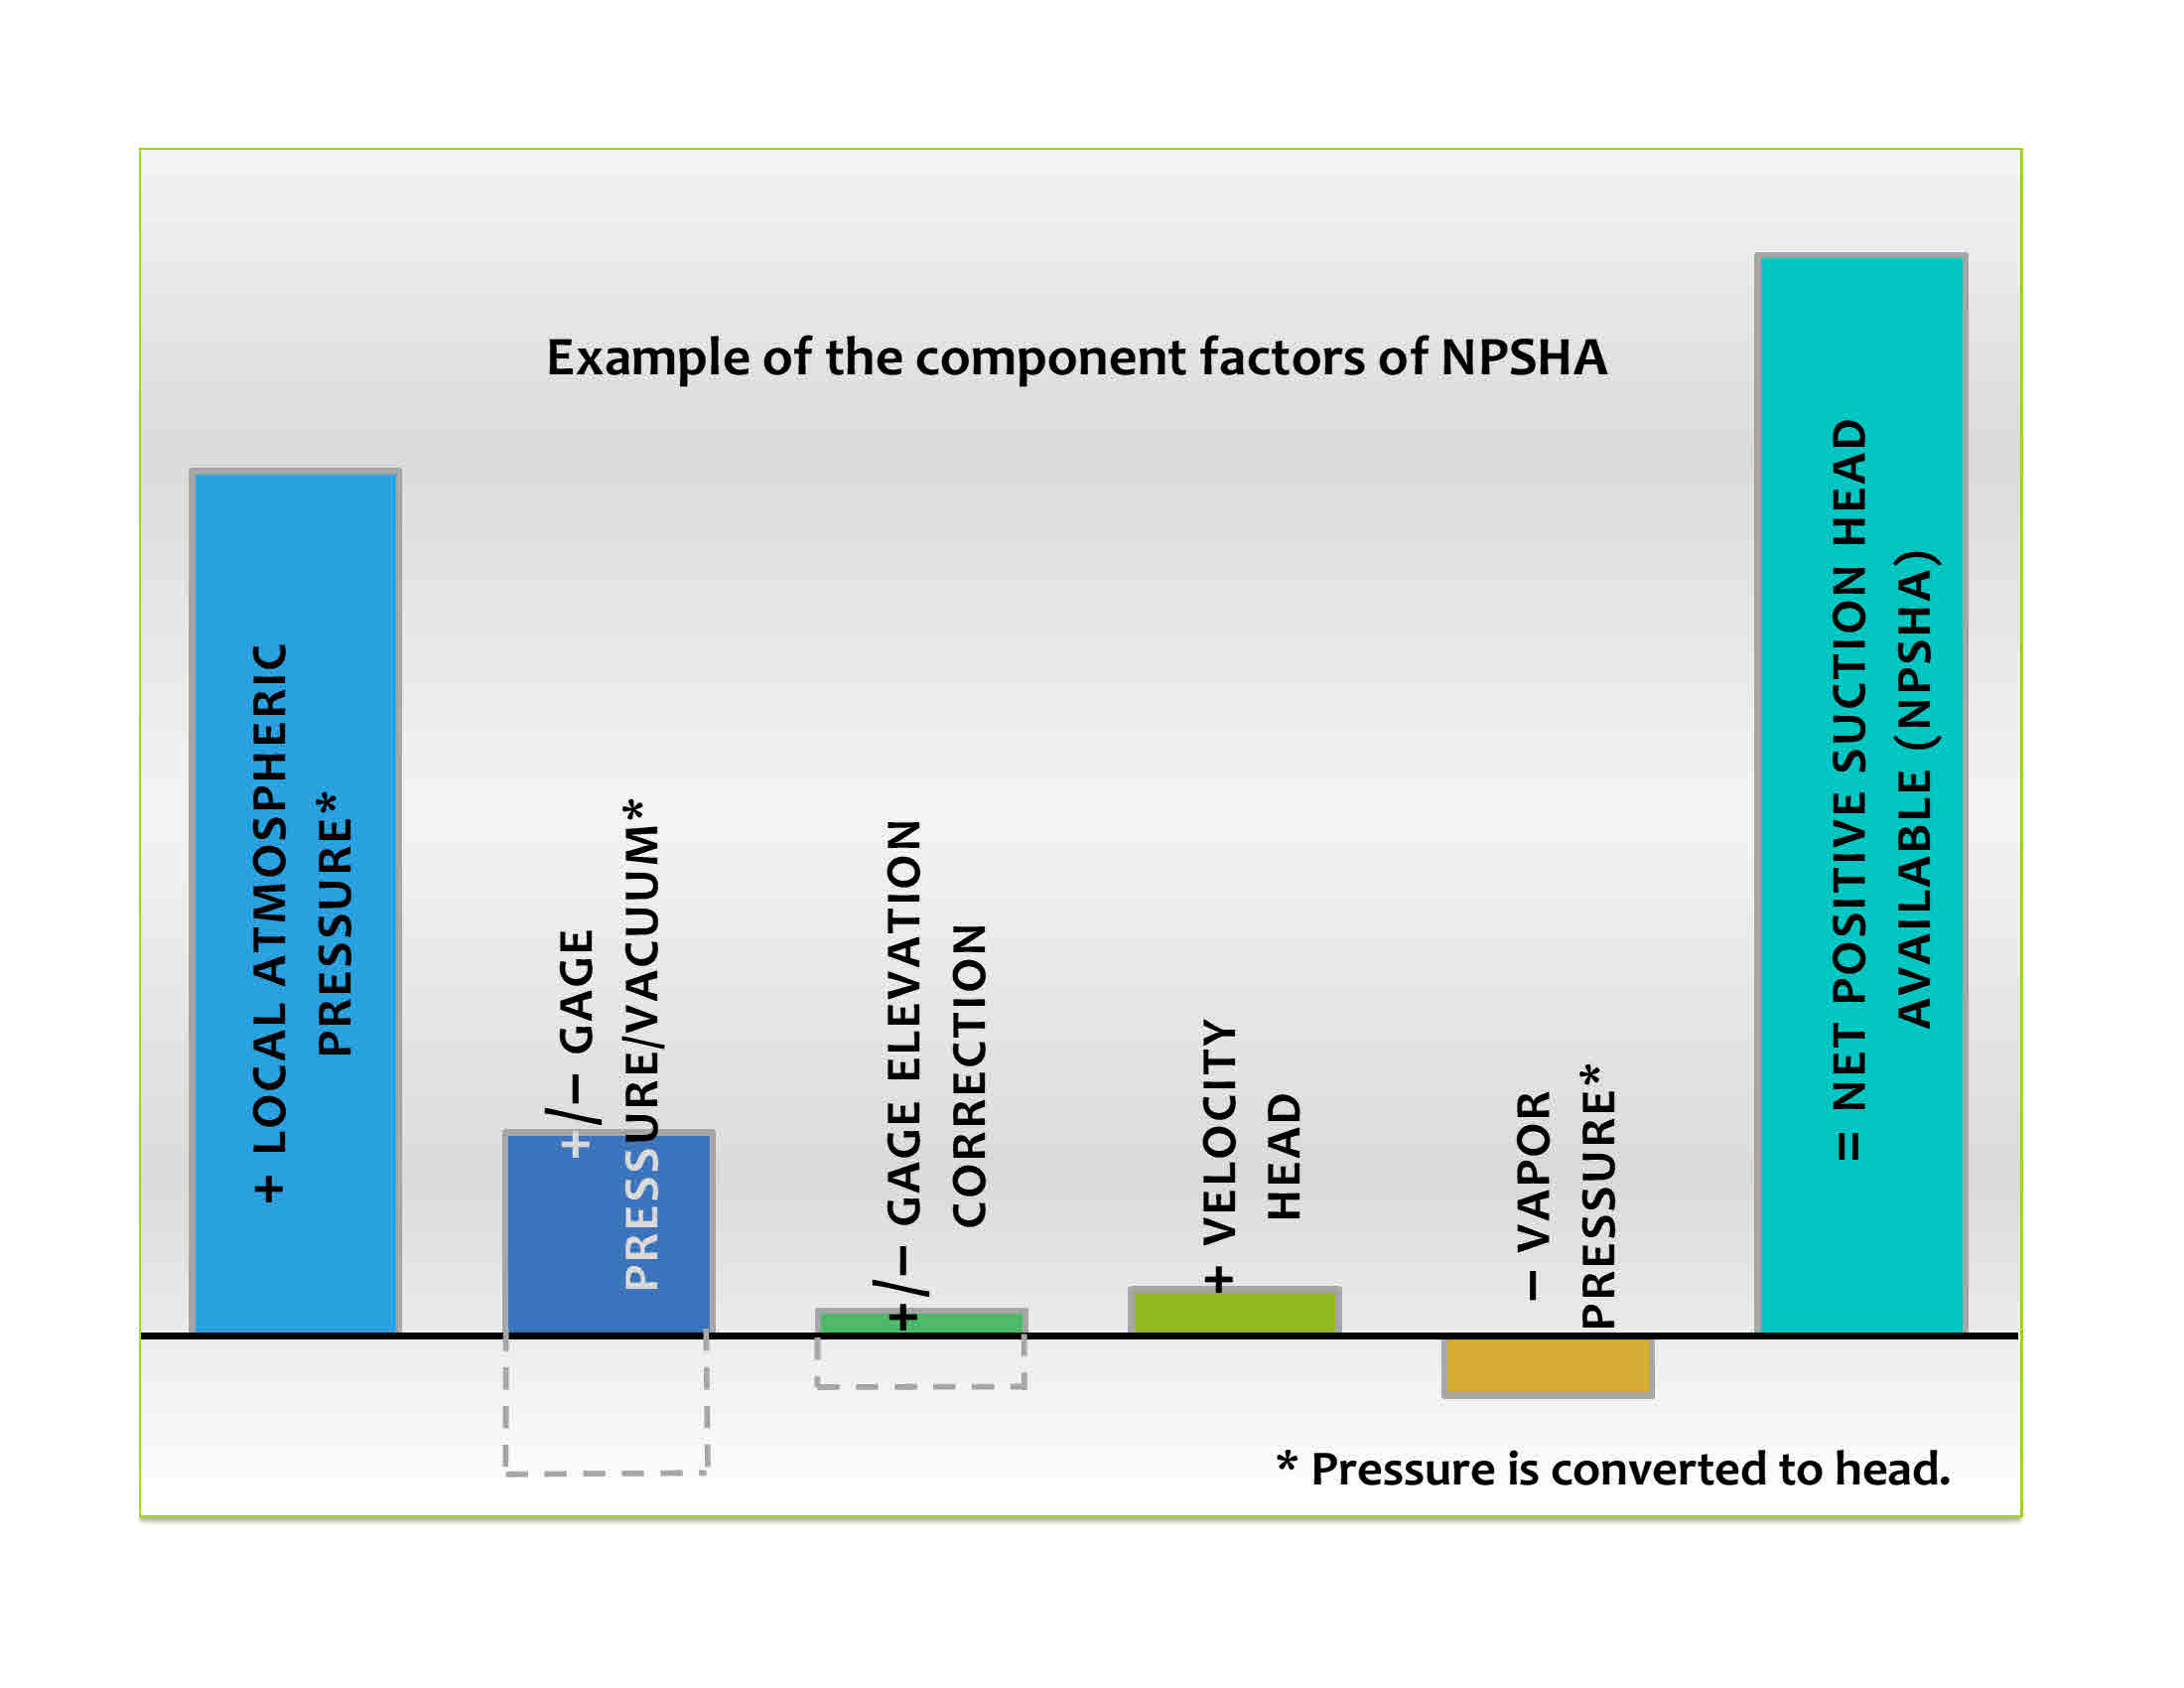 Components of NPSH Available (NPSHA), the pump system NPSH